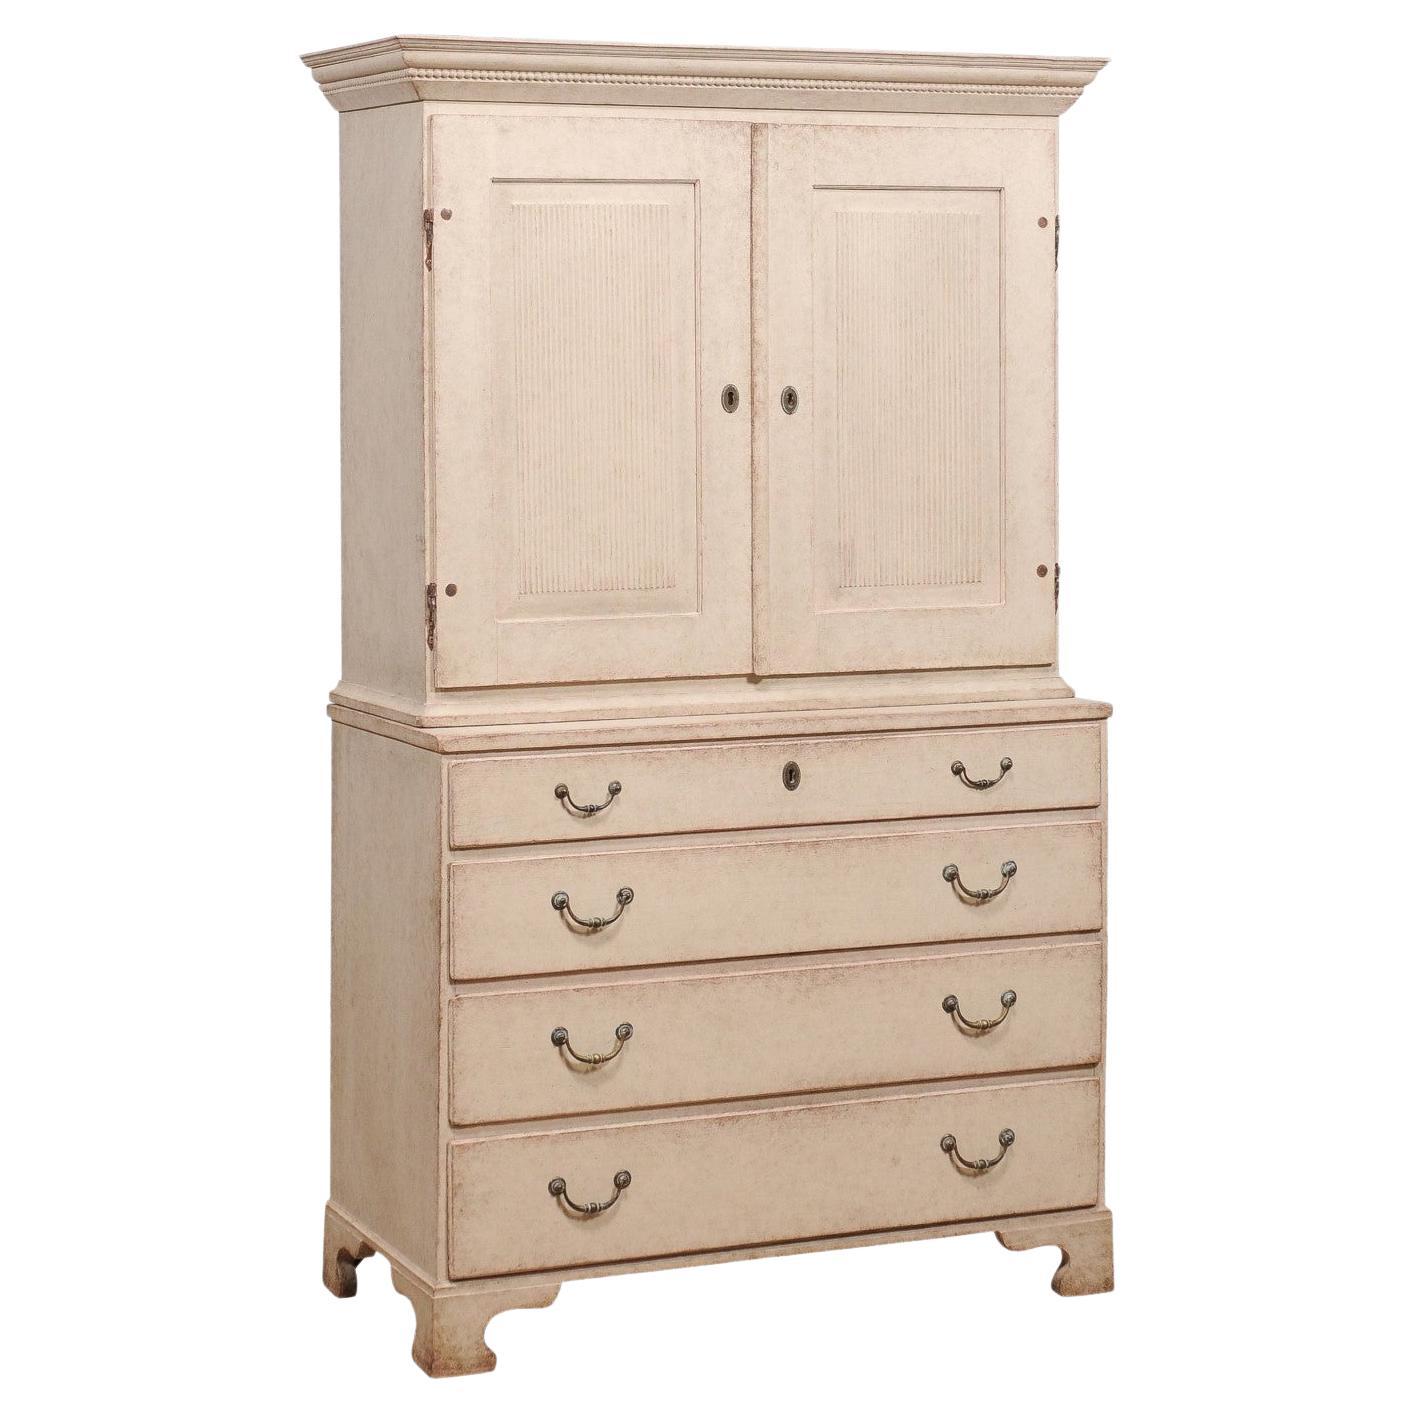 1834 Swedish Two-part Painted Cabinet with Doors and Graduated Drawers